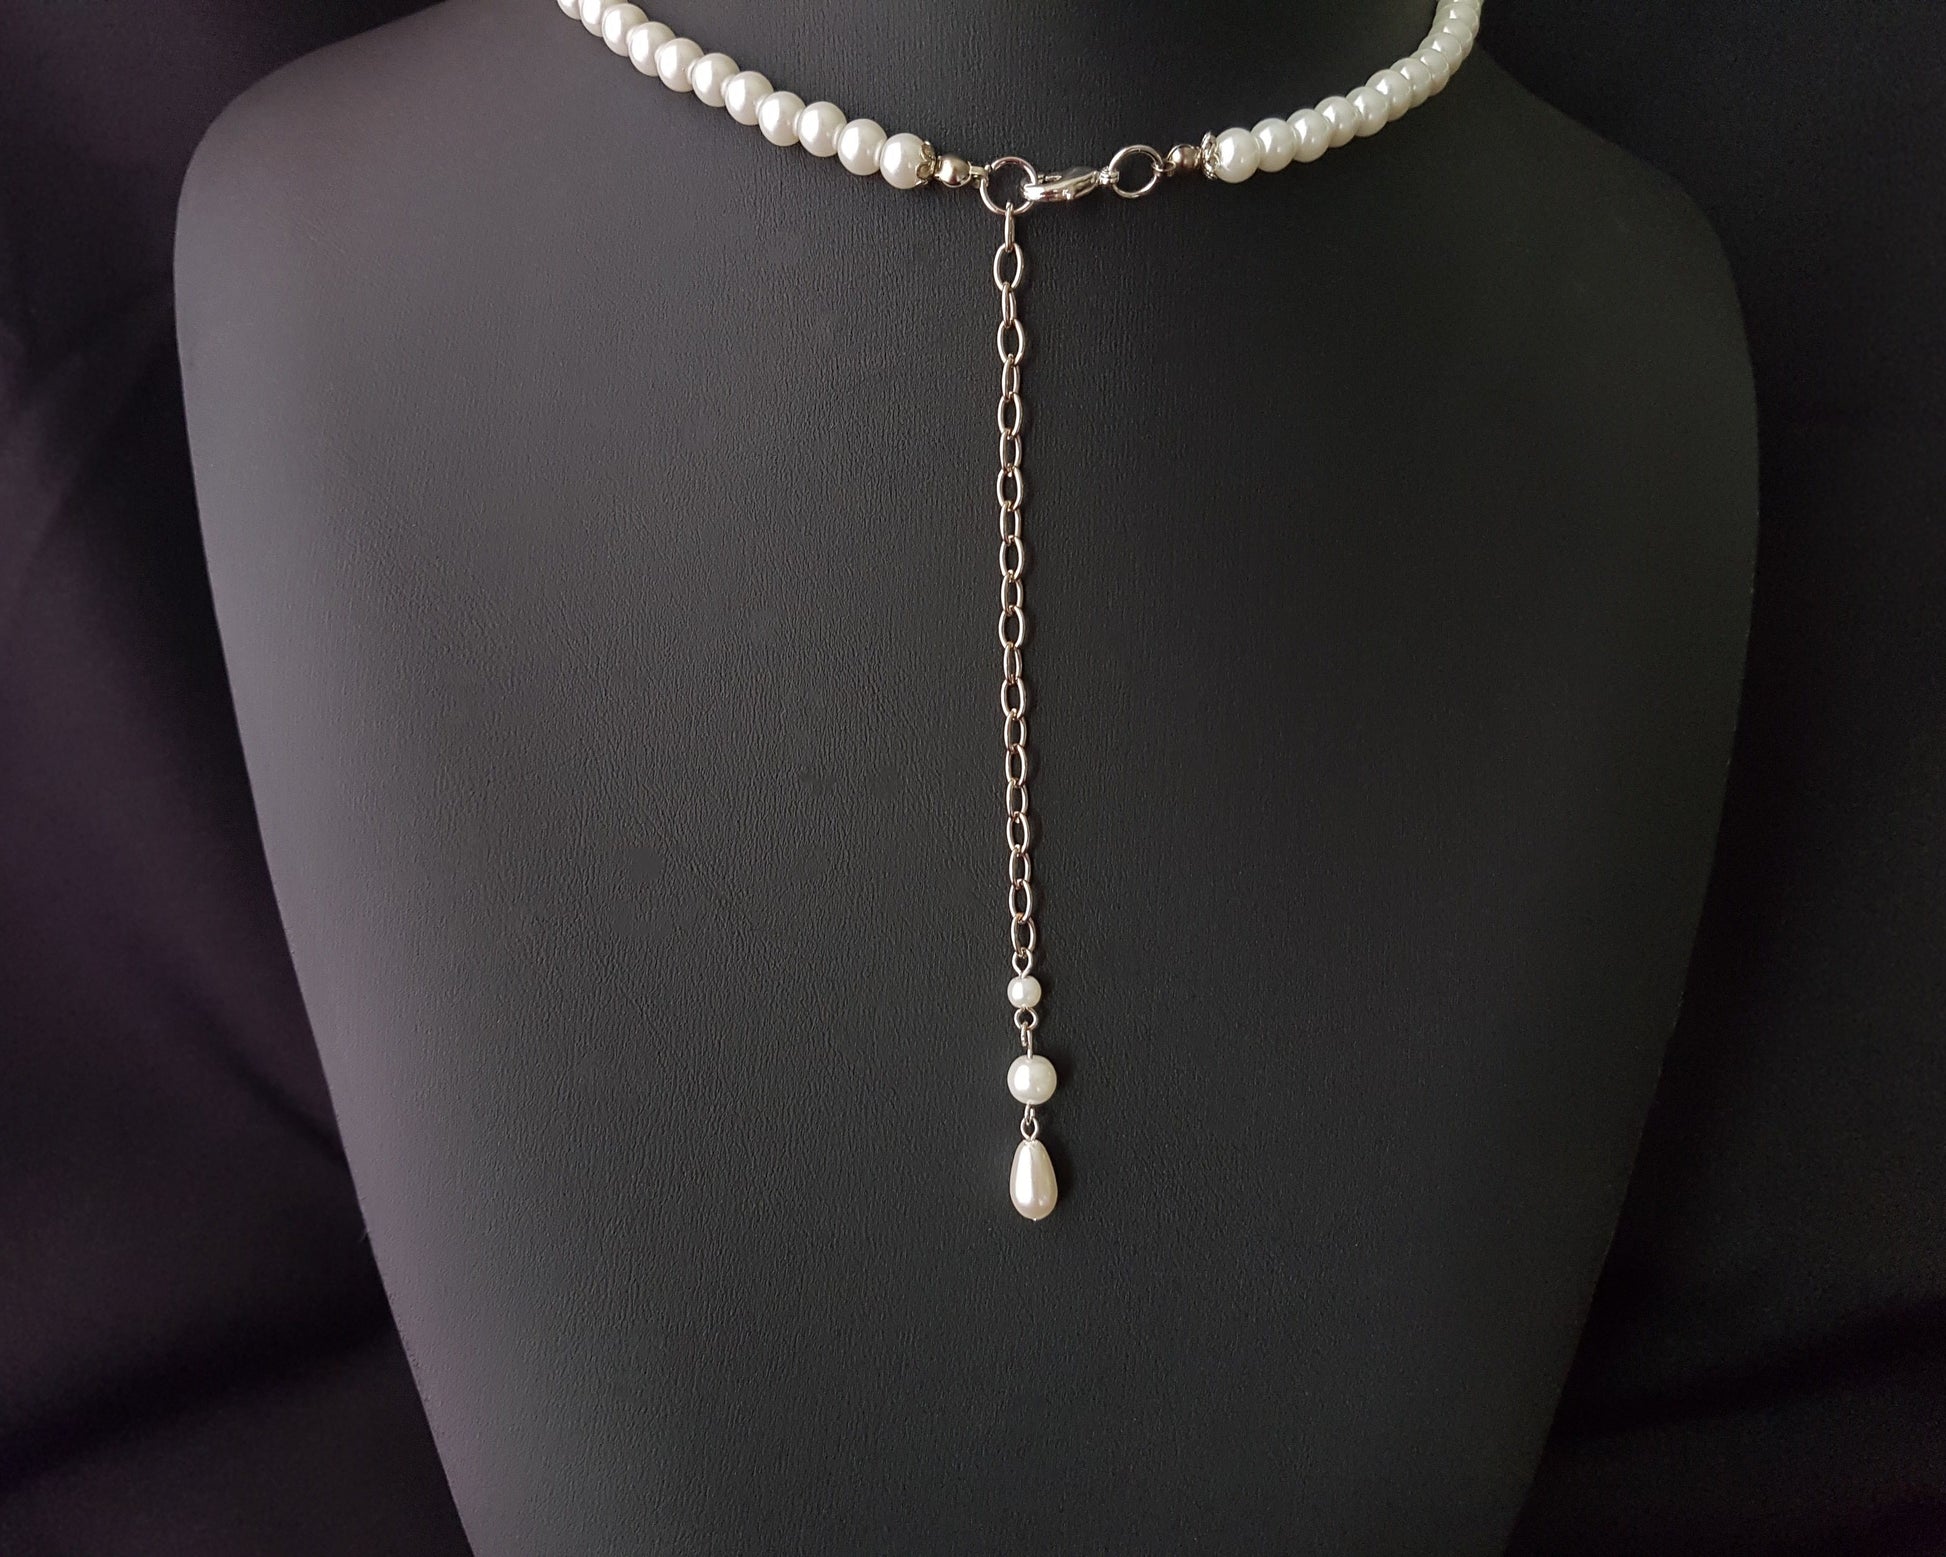  long back chain with another pearl drop displayed on black. 